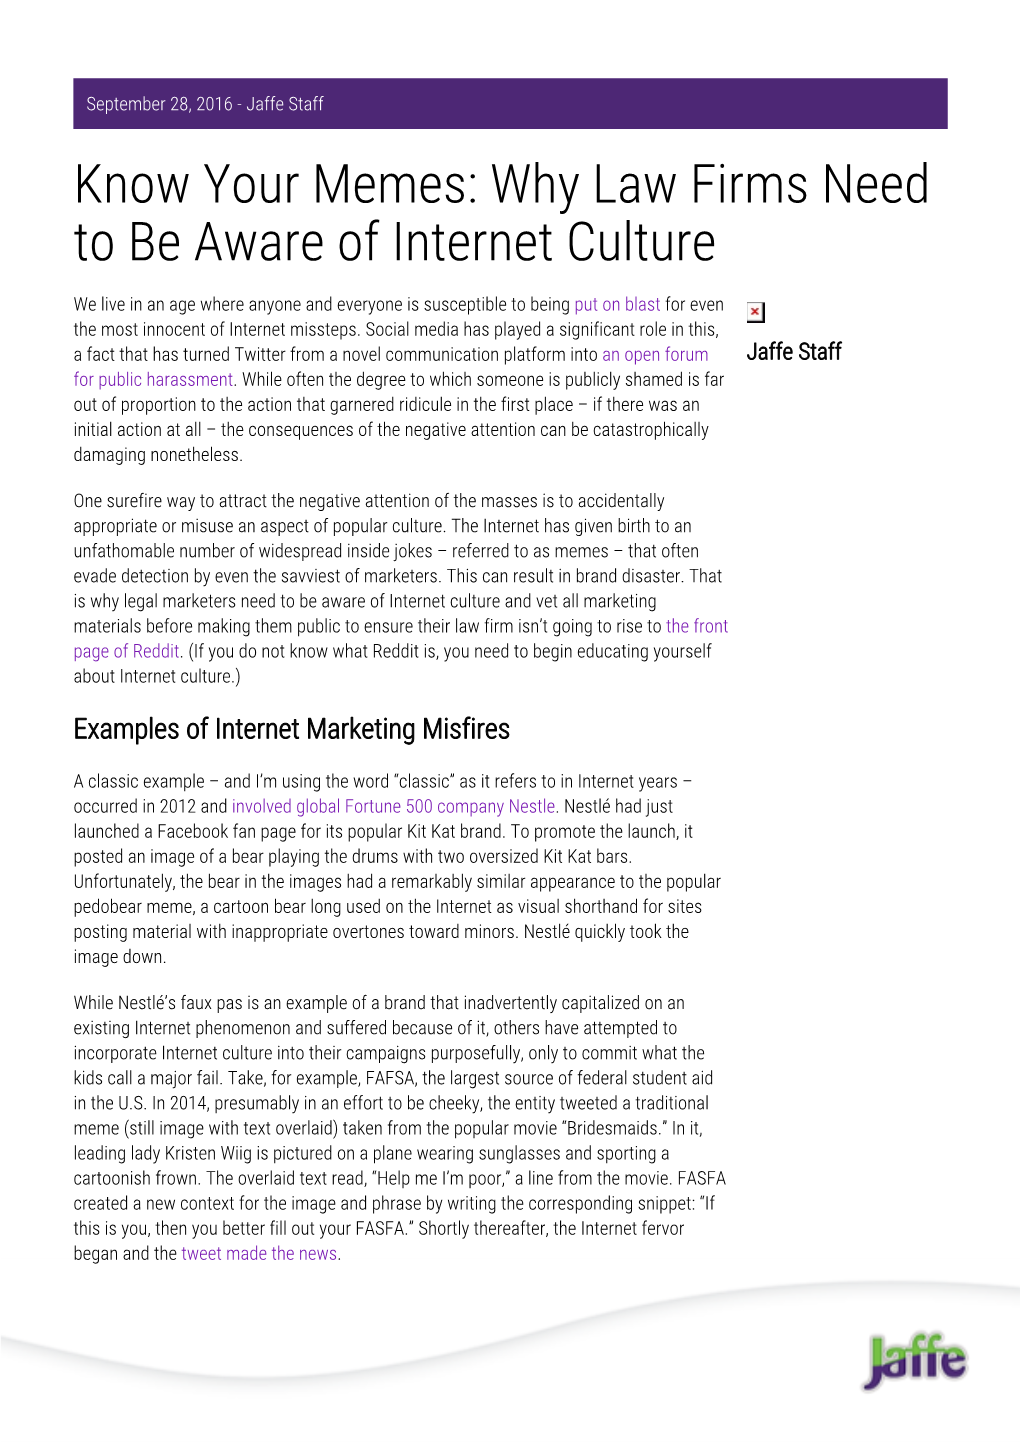 Why Law Firms Need to Be Aware of Internet Culture